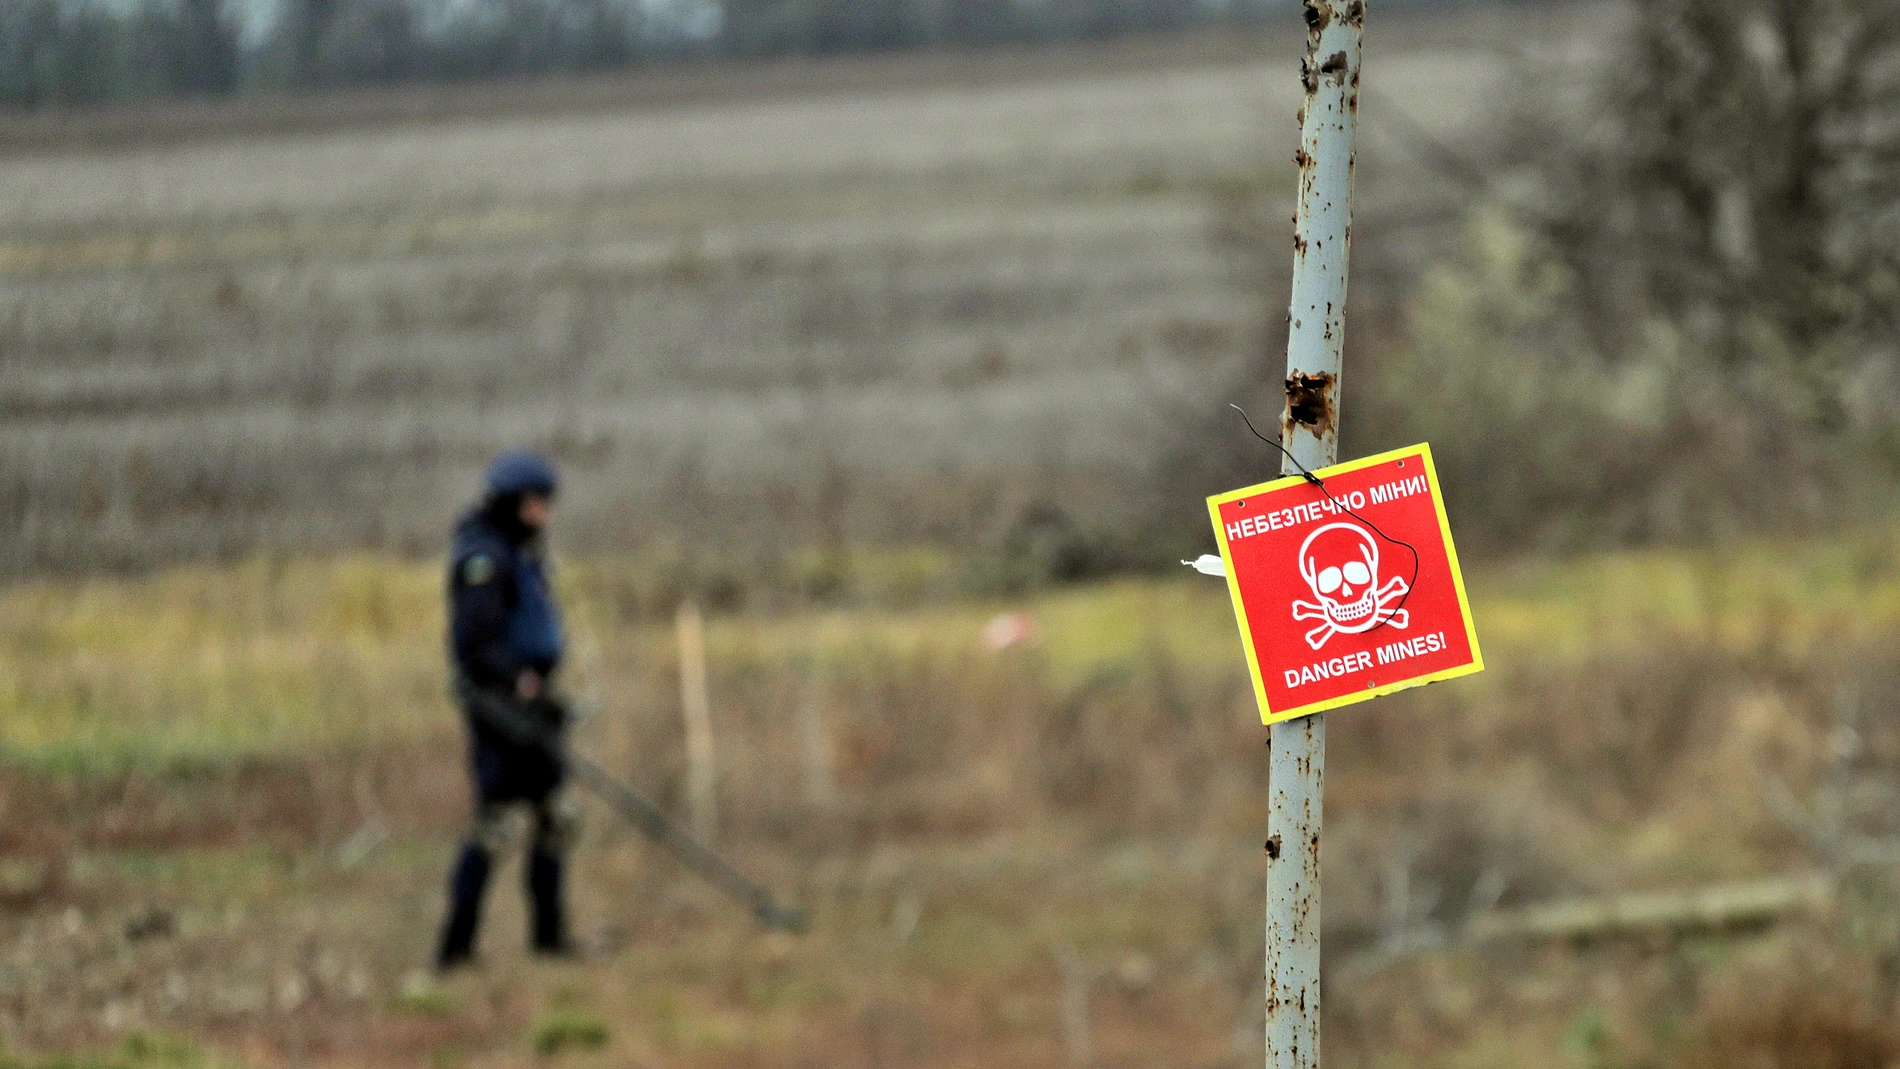 November 16, 2022, Kherson Region, Ukraine: A 'Danger Mines!' sign is pictured during a mine clearance effort in the part of Kherson Region liberated from Russian invaders, southern Ukraine. (Foto de ARCHIVO) 16/11/2022